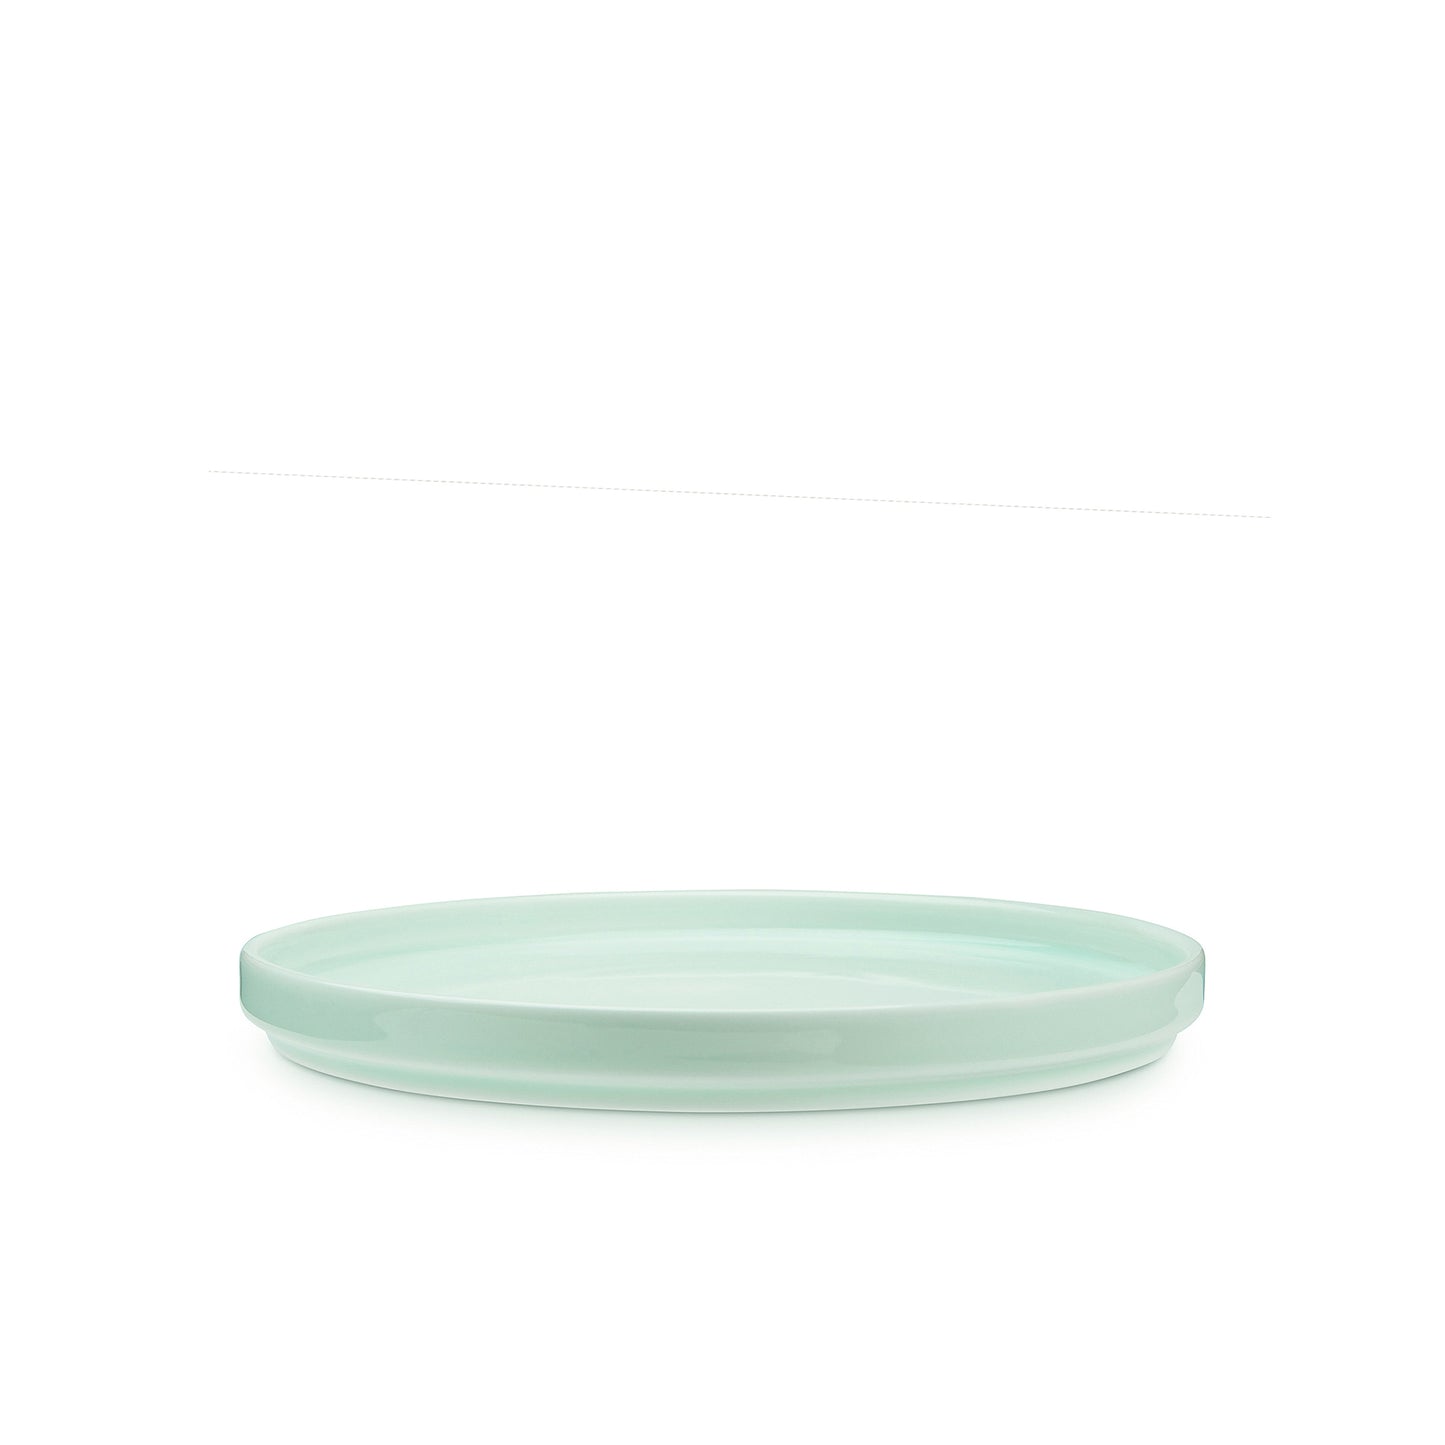 10" green celadon porcelain straight-sided dinner plate, angle view, , media 3 of 4